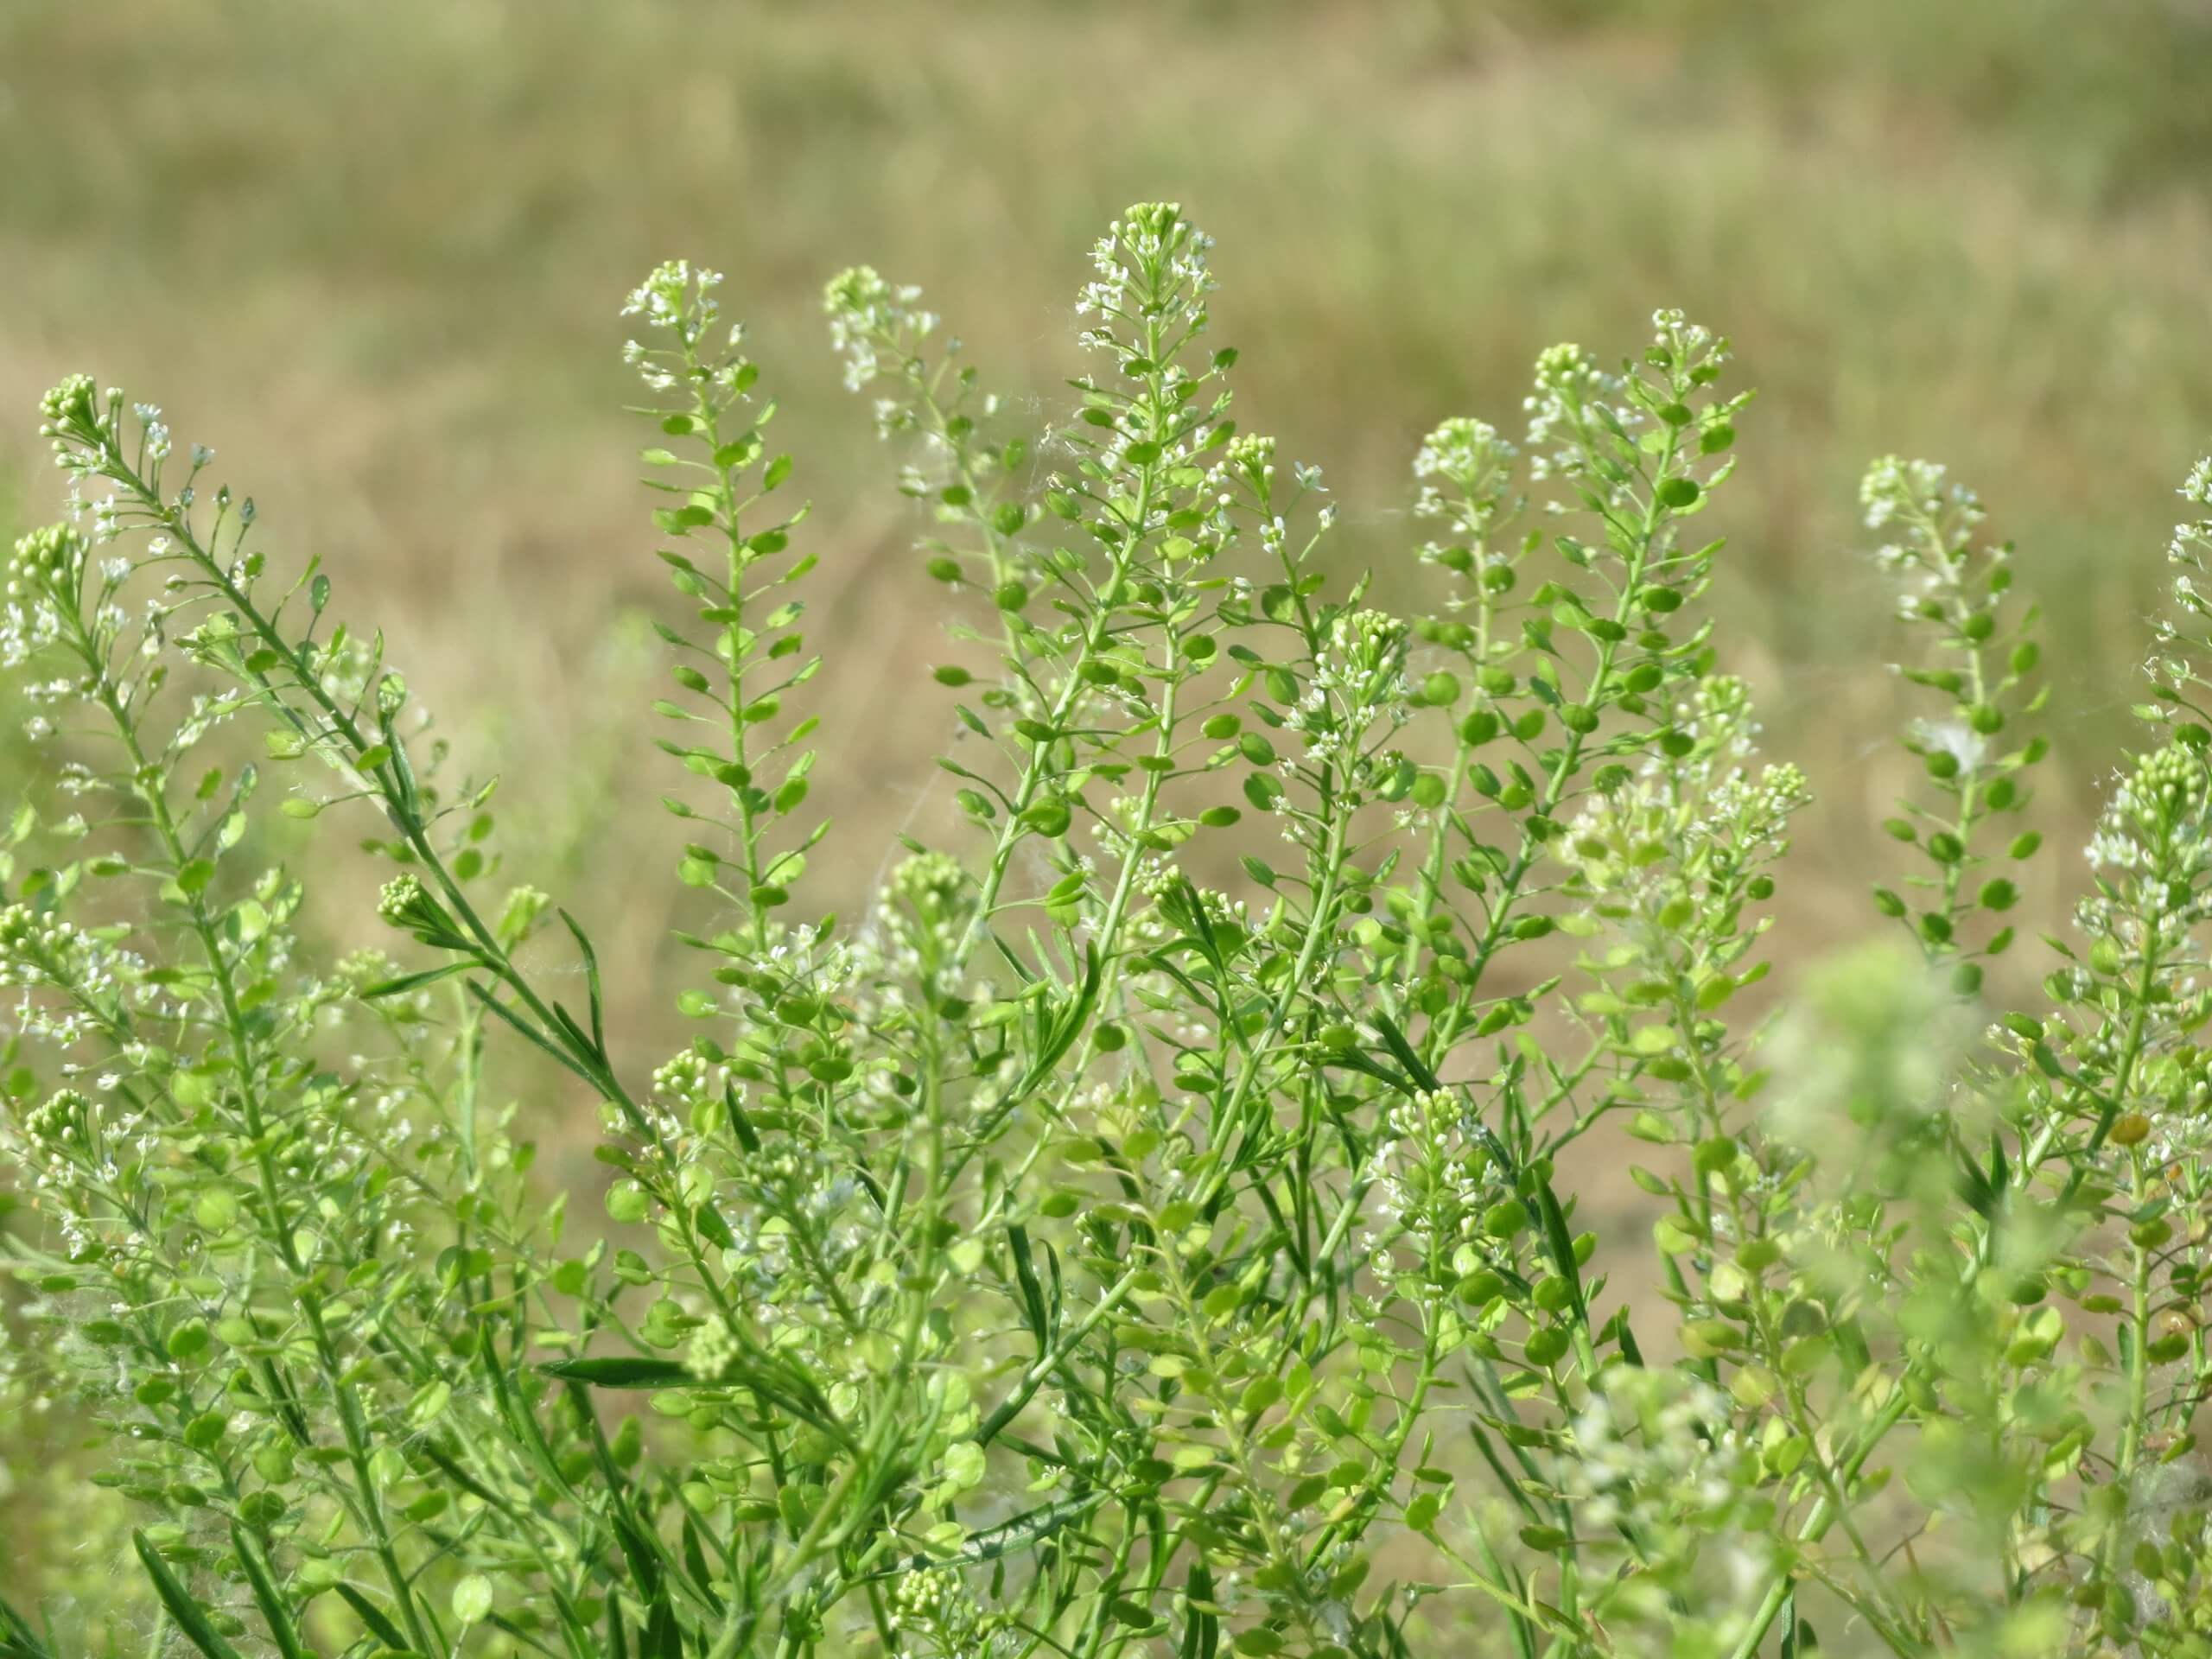 Peppergrass: Potent Pipsqueak - Eat The Weeds and other things, too